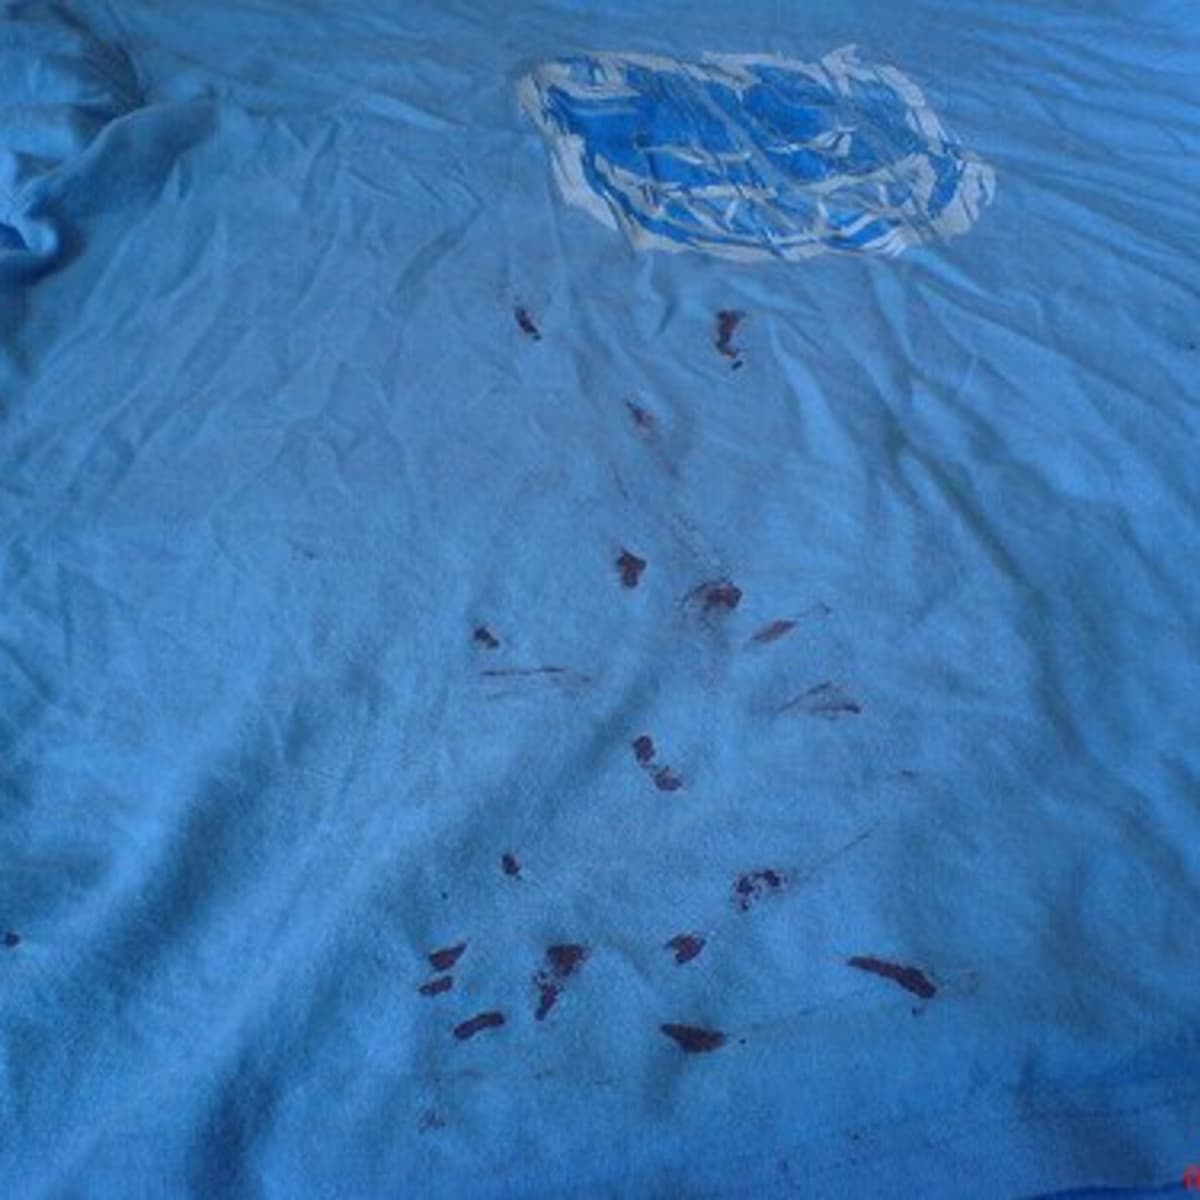 How to Remove Blood Stains From Clothes